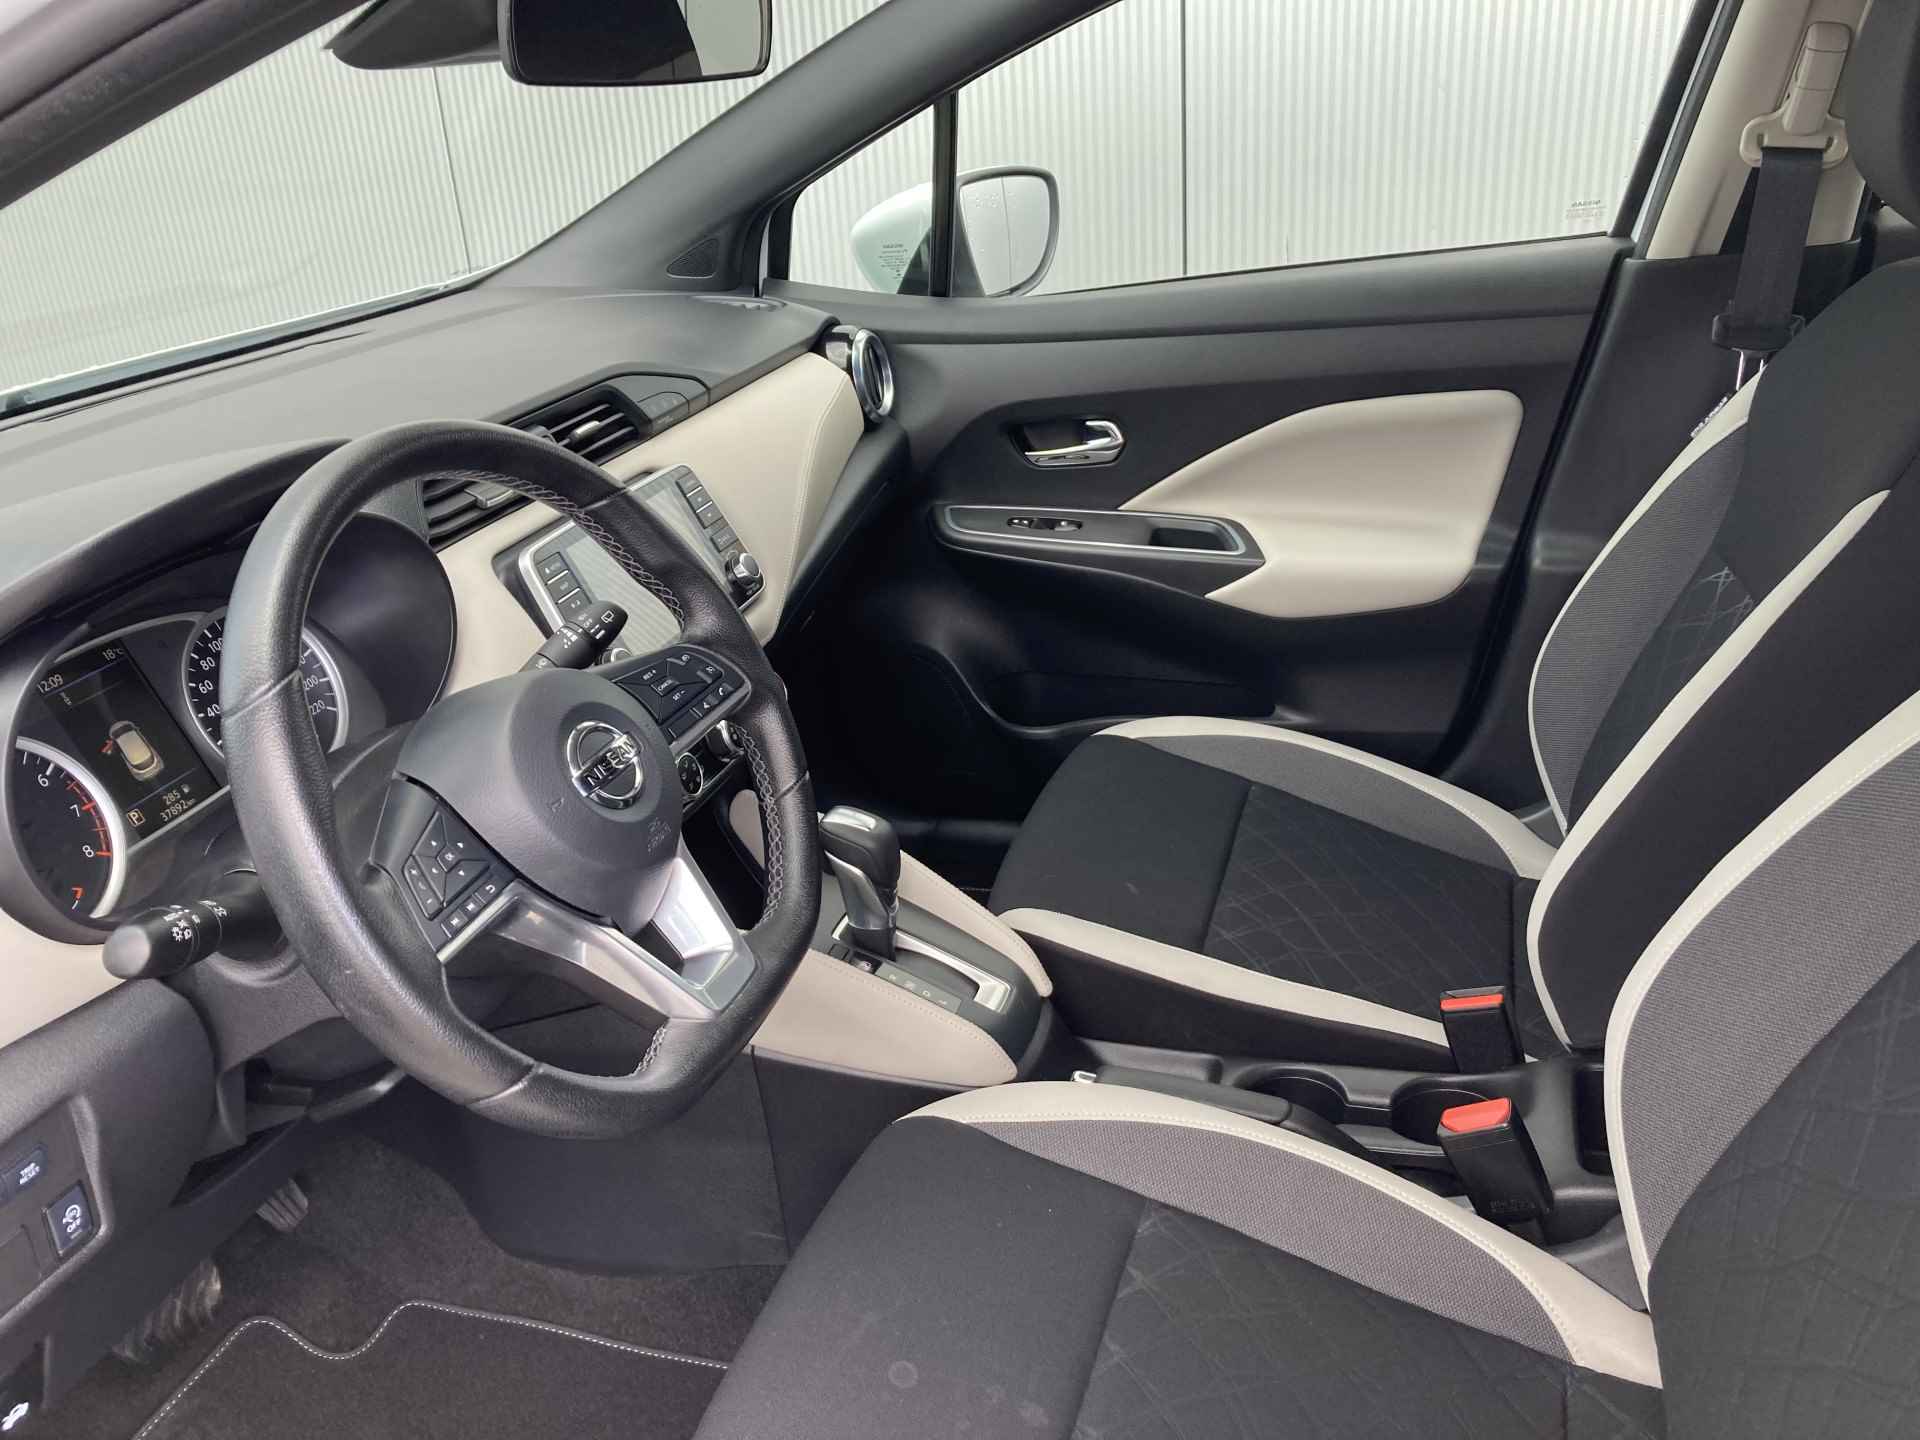 Nissan Micra 1.0 IG-T DCT Automaat N-Connecta Navigatie, Cruise Control, Airco, 16"Lm, Achteruitrijcamera - 9/20